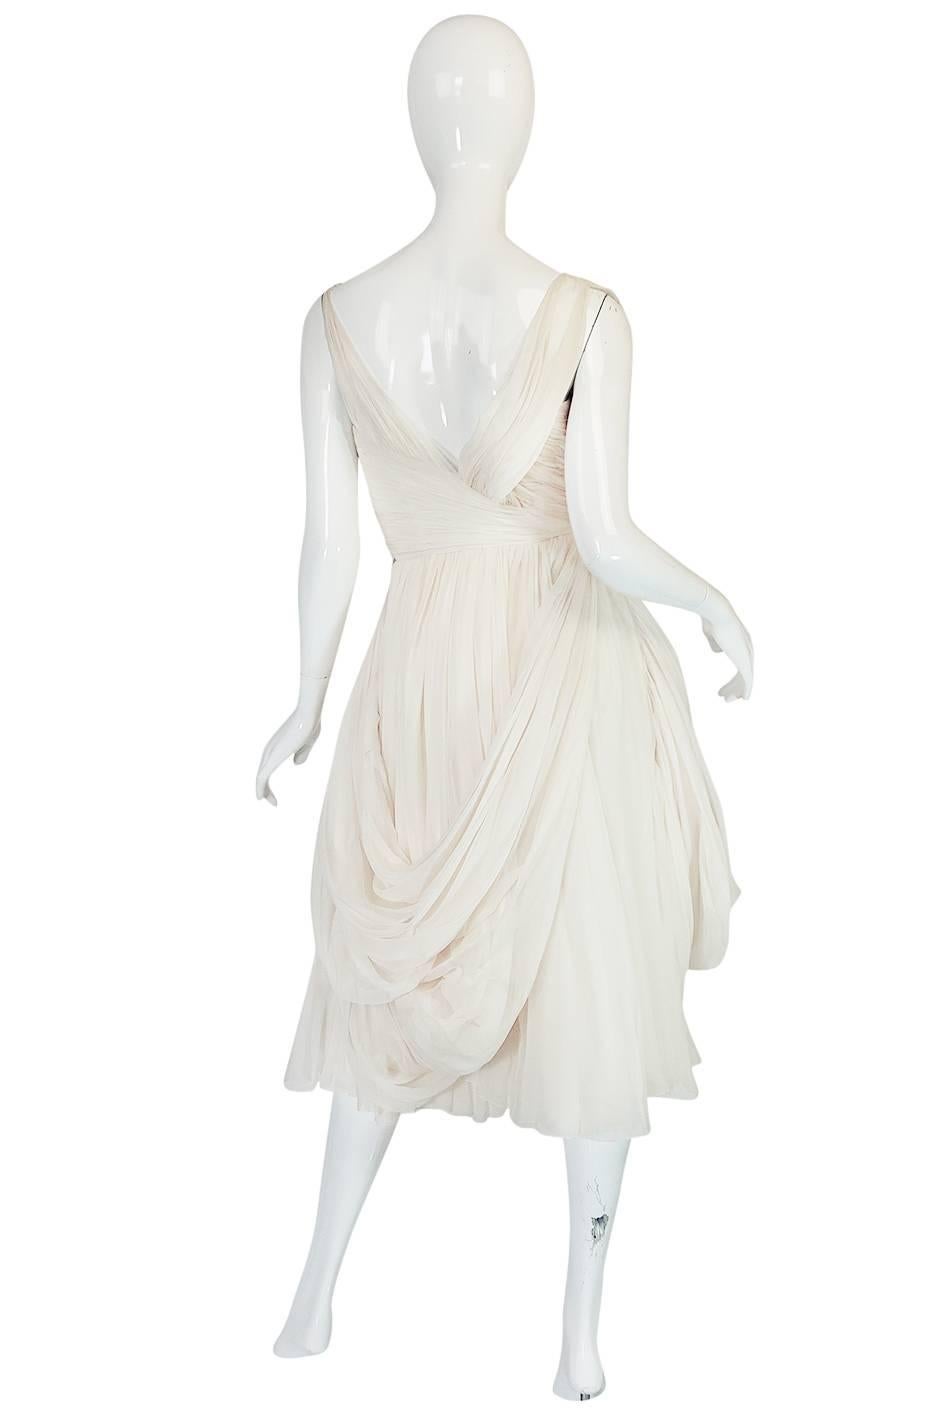 This is a wonderful little dress in the manner of Jean Desses. It unfortunately does not have a label so I am hesitant to attribute it to his work though it may be a ready-to-wear piece. Given its design and lines it certainly could pass as one and